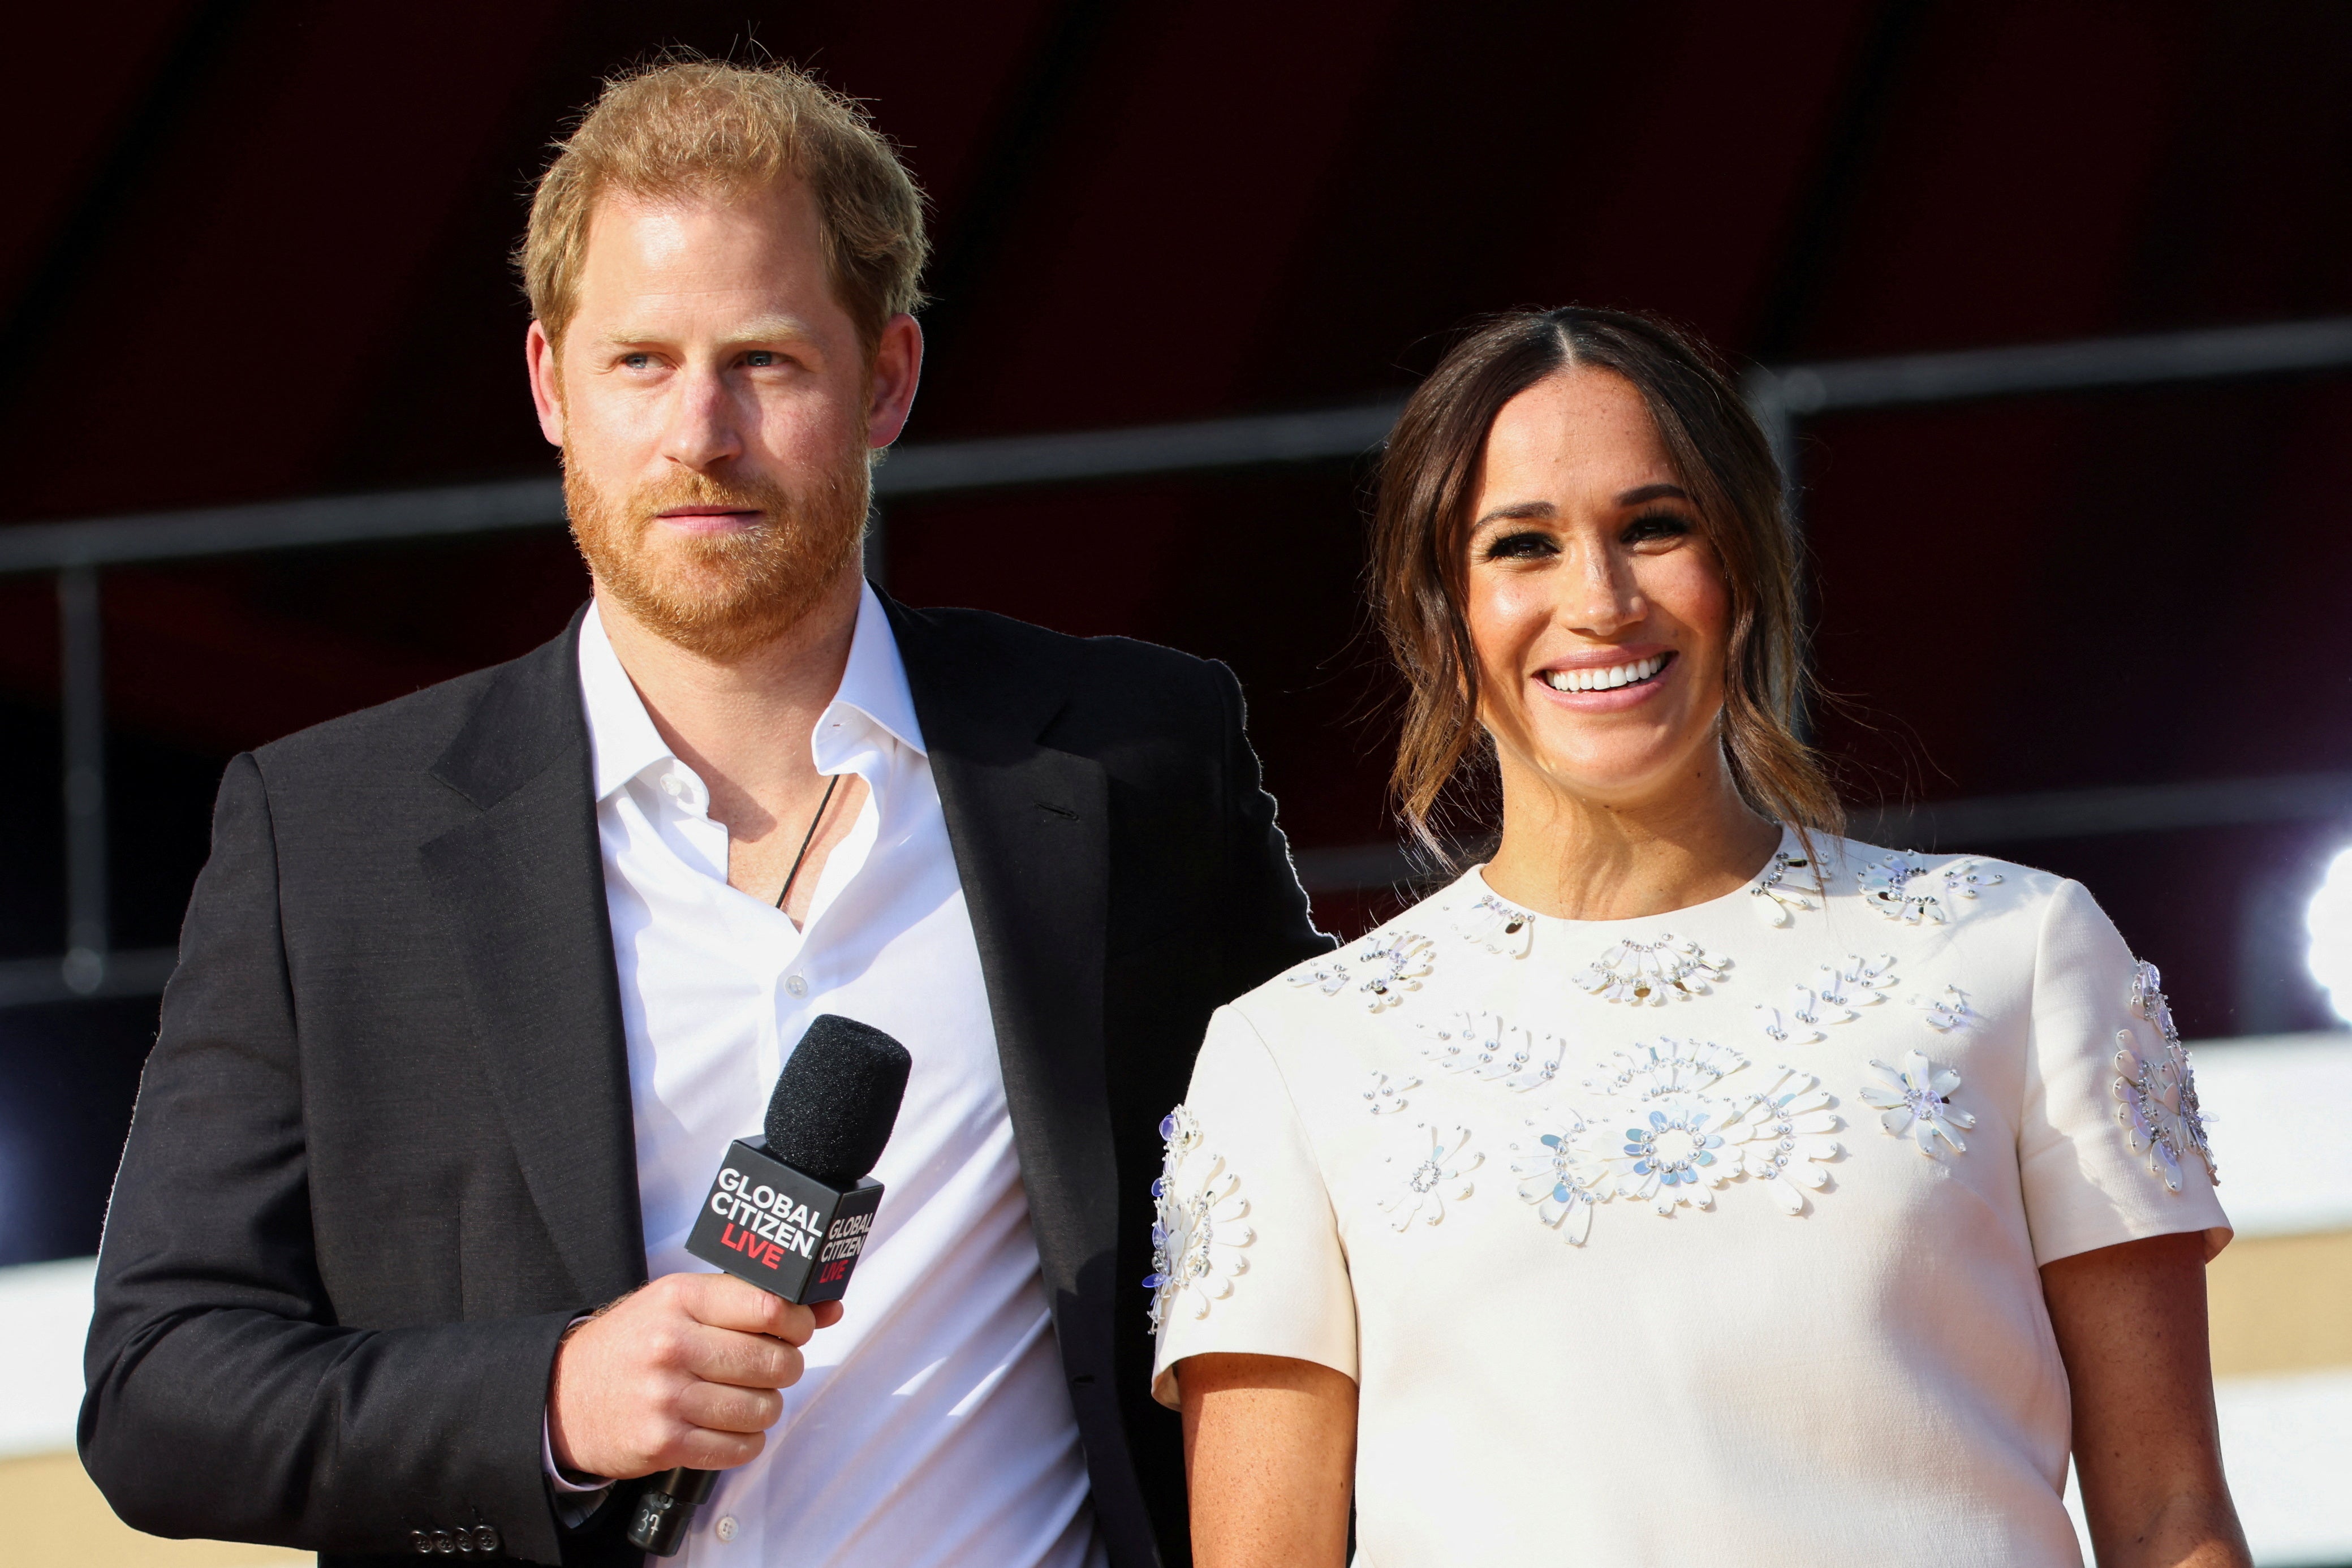 Prince Harry now lives in California with his wife and two children.